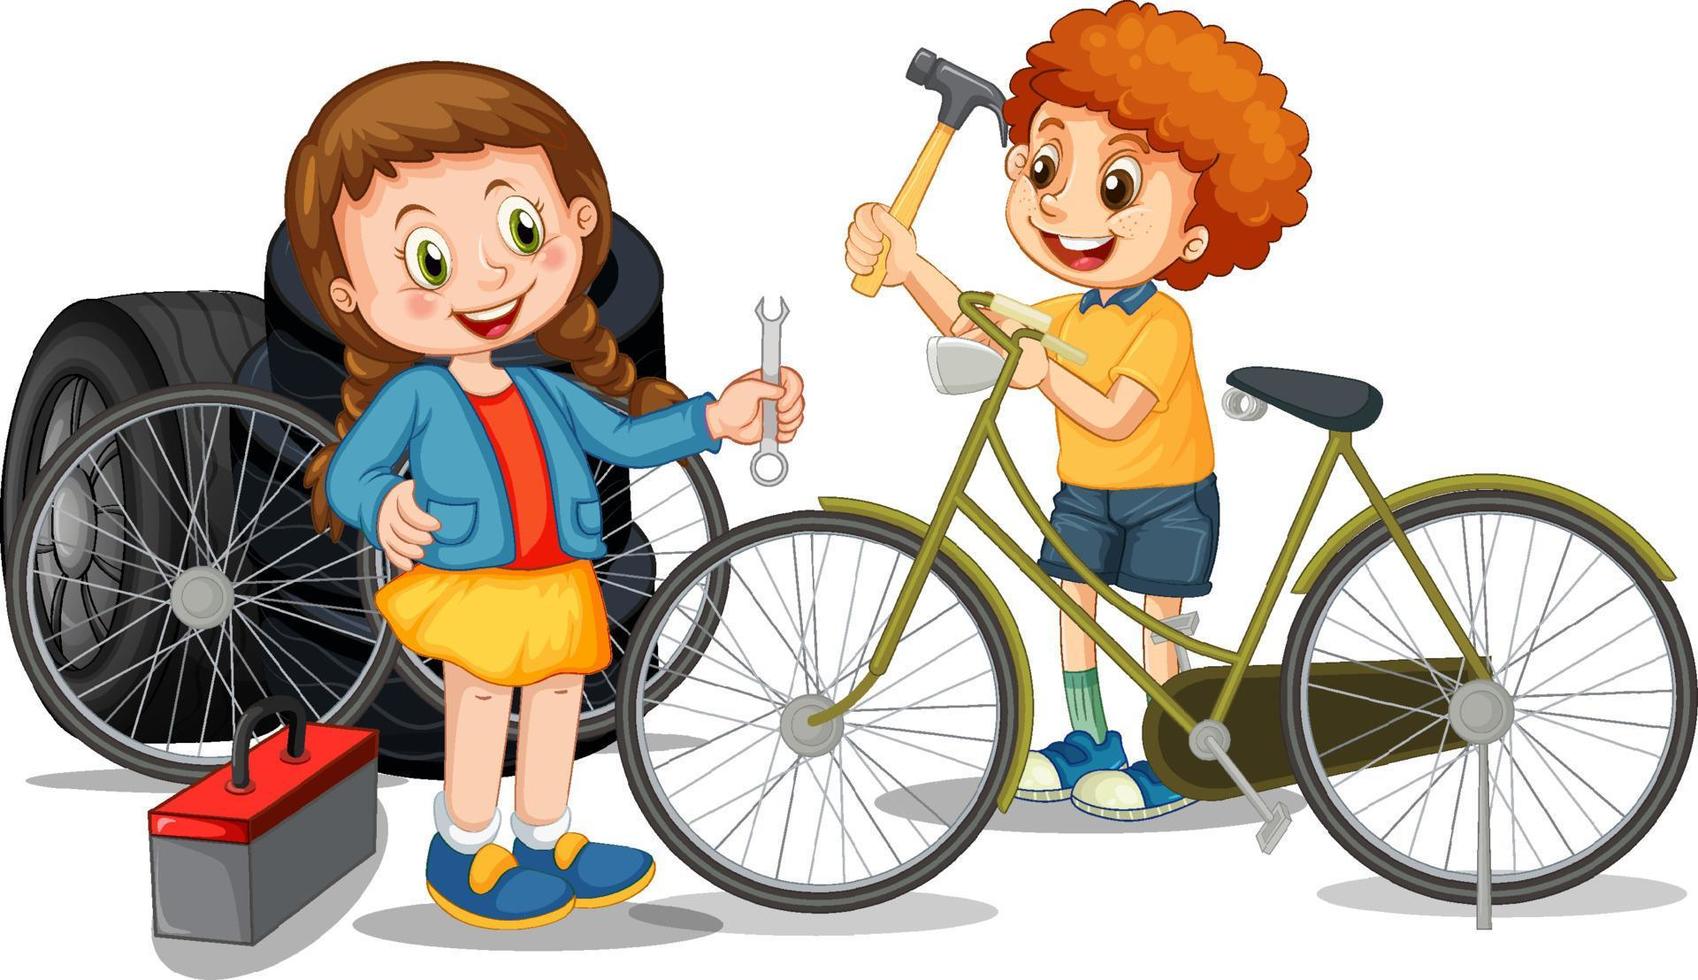 Children repairing bicycle together on white background vector